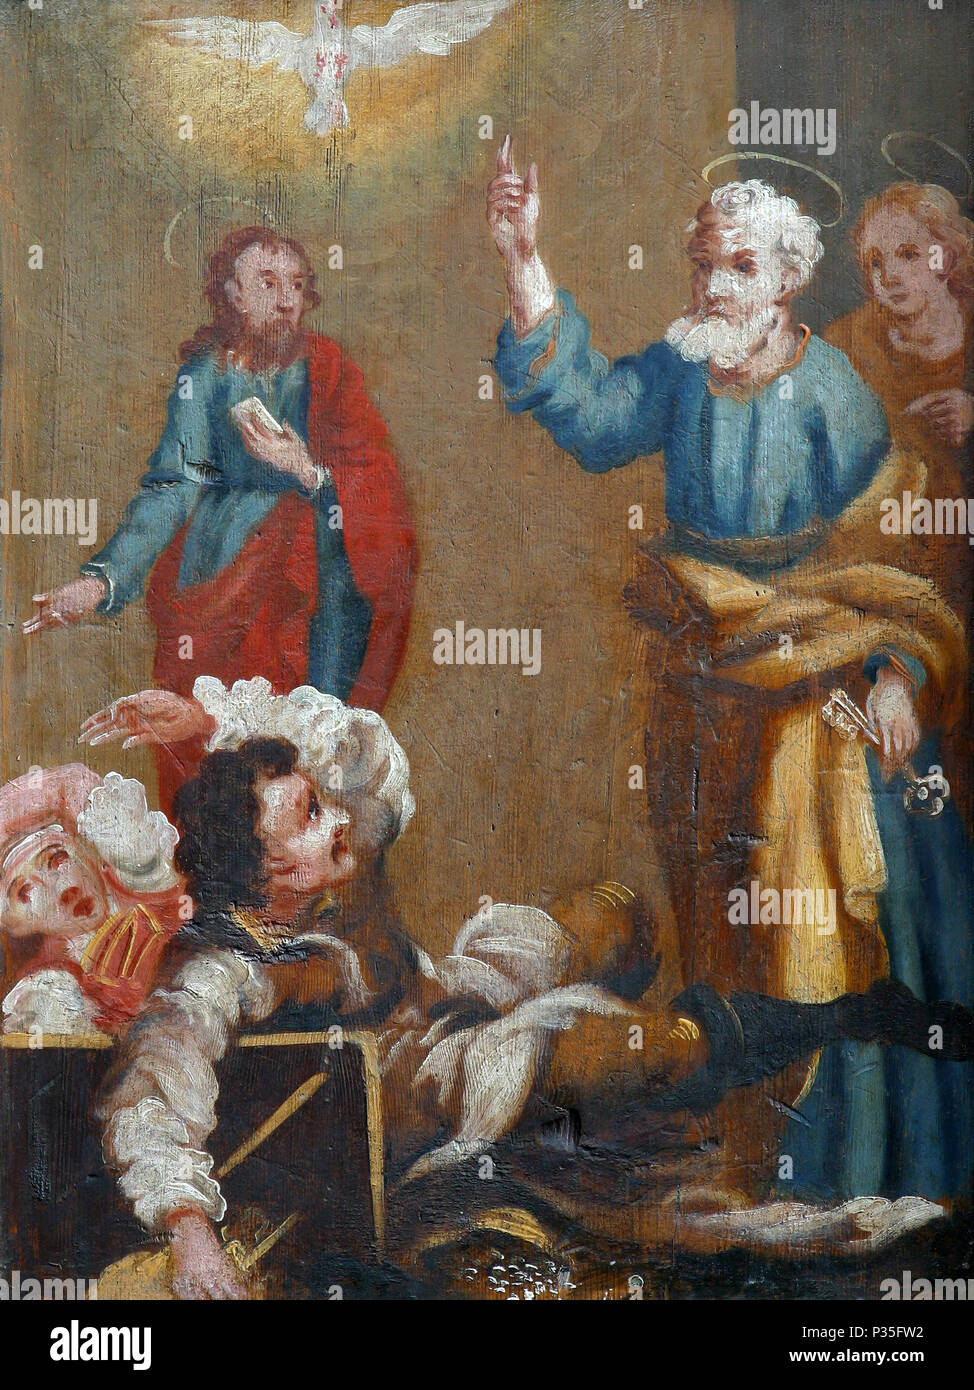 Scenes from the life of St. Peter, picture on a wardrobe in the sacristy of the church of the Immaculate Conception in Lepoglava, Croatia Stock Photo